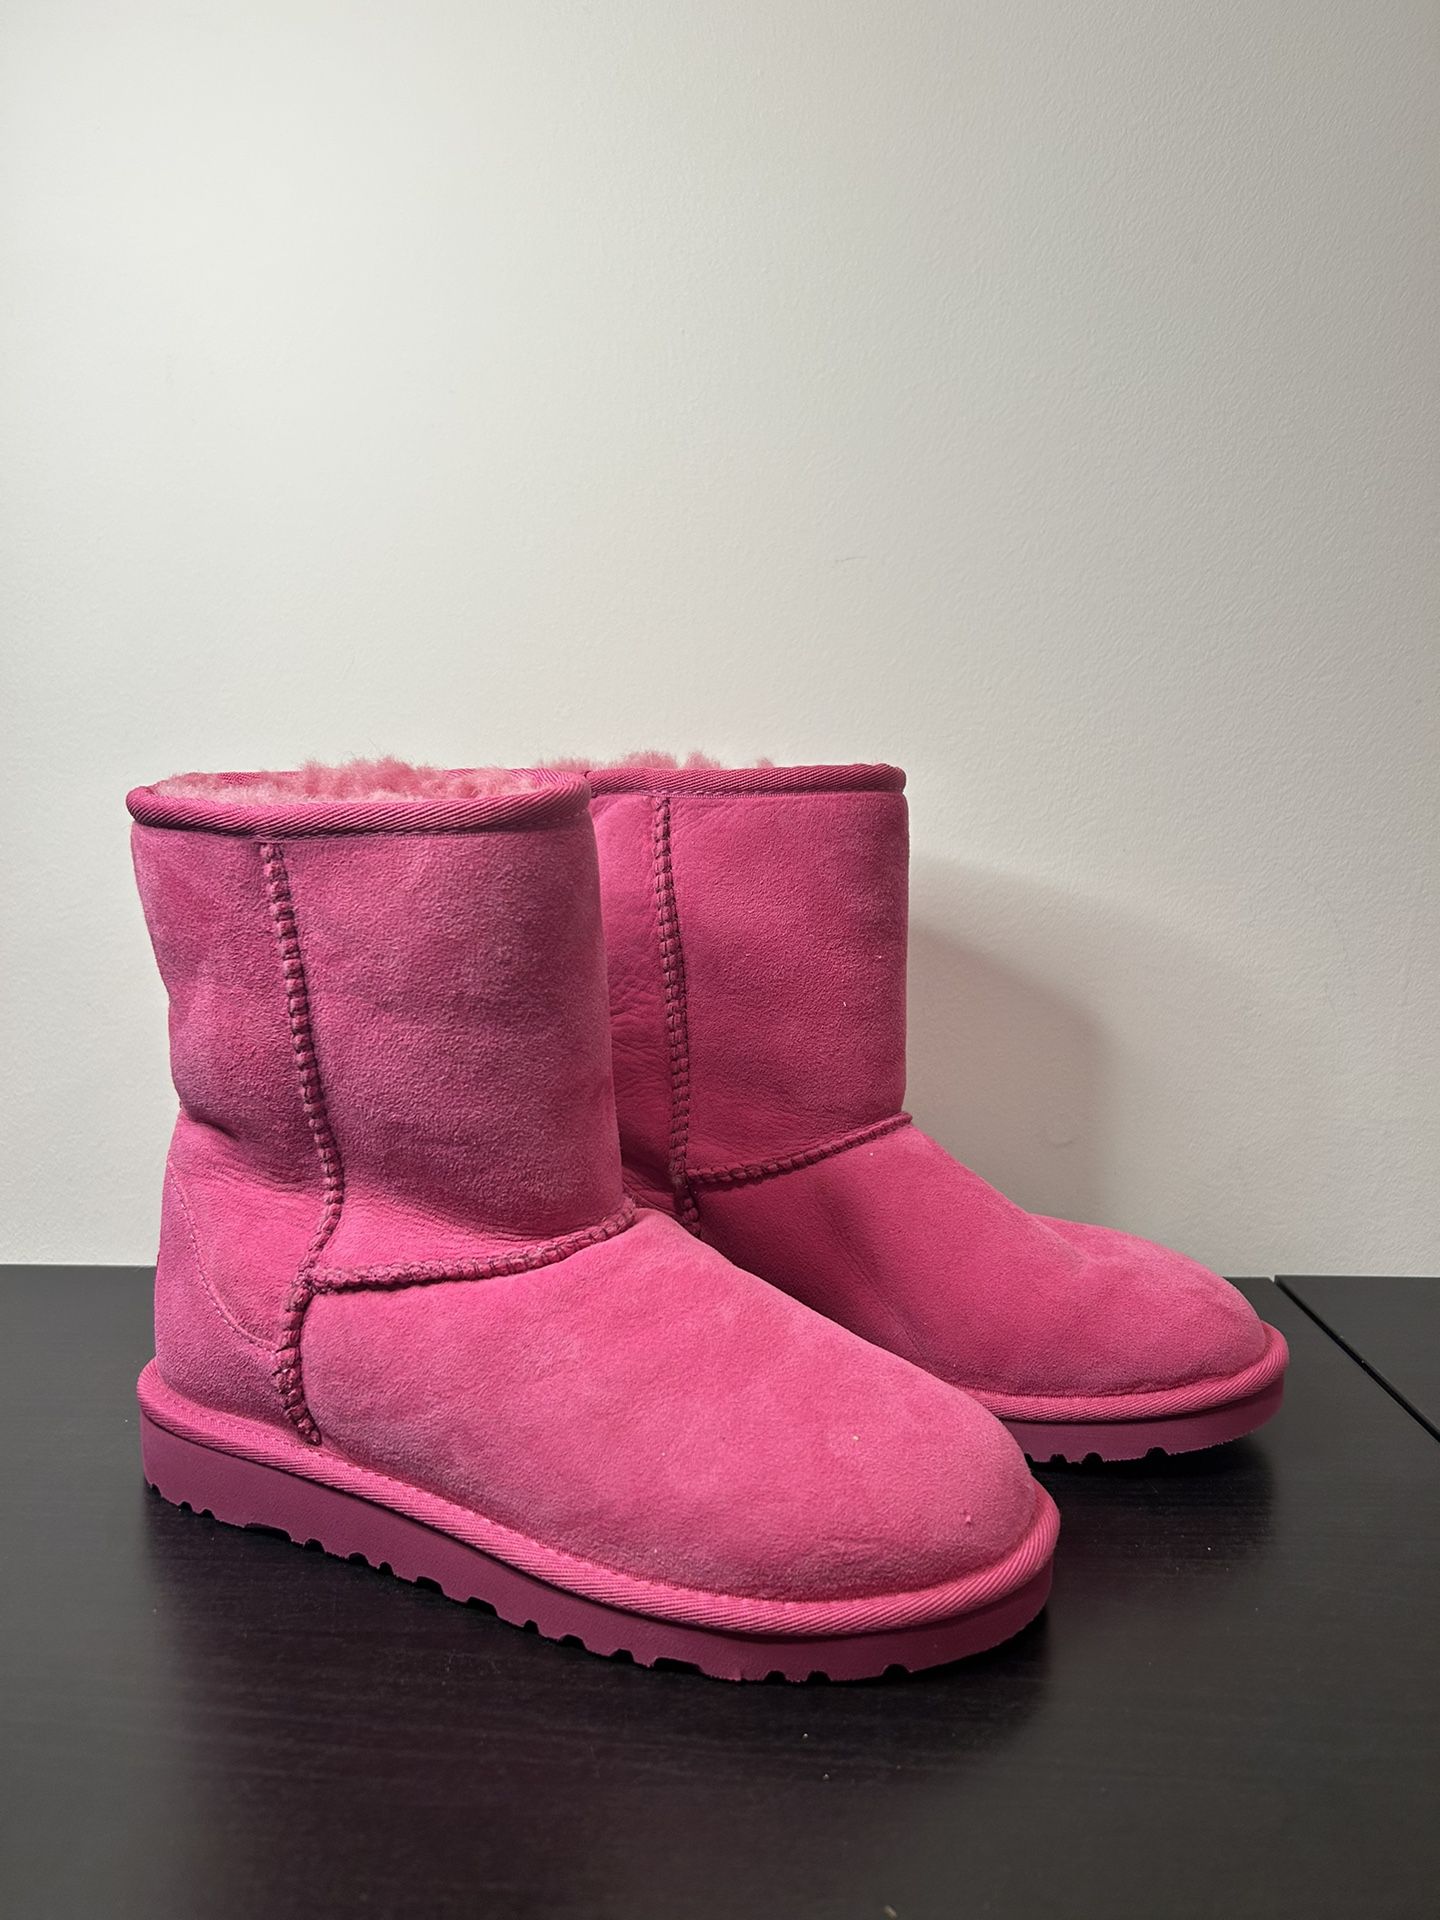 Ugg Kids Classic II Boot "Berry" Style 1017703K Size Youth 5